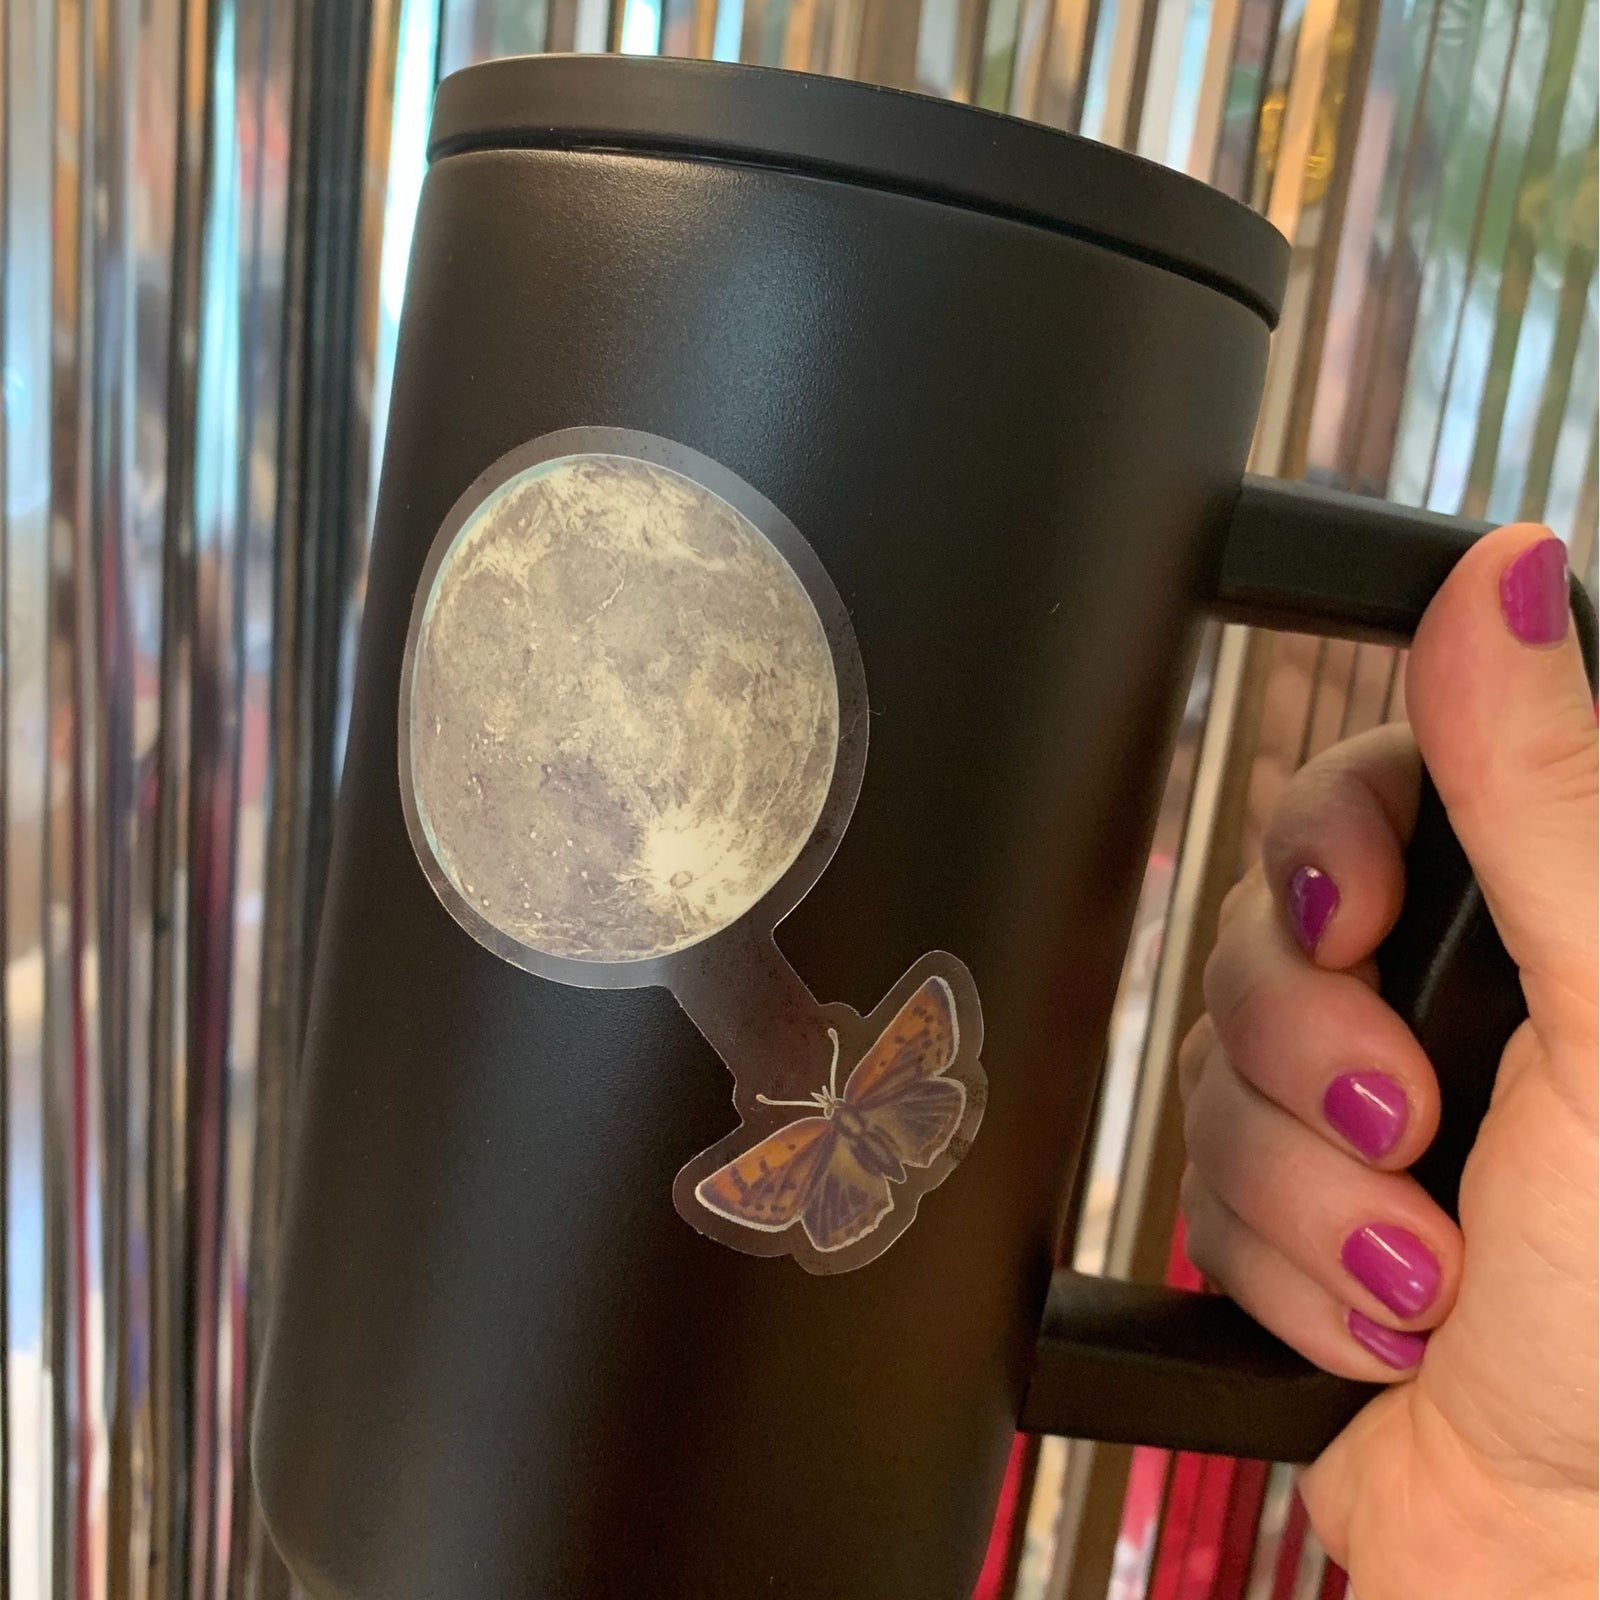 Moth and Moon Transparent Sticker for Dark Surfaces | Spooky Clear Decal for Black Water Bottles and Laptops